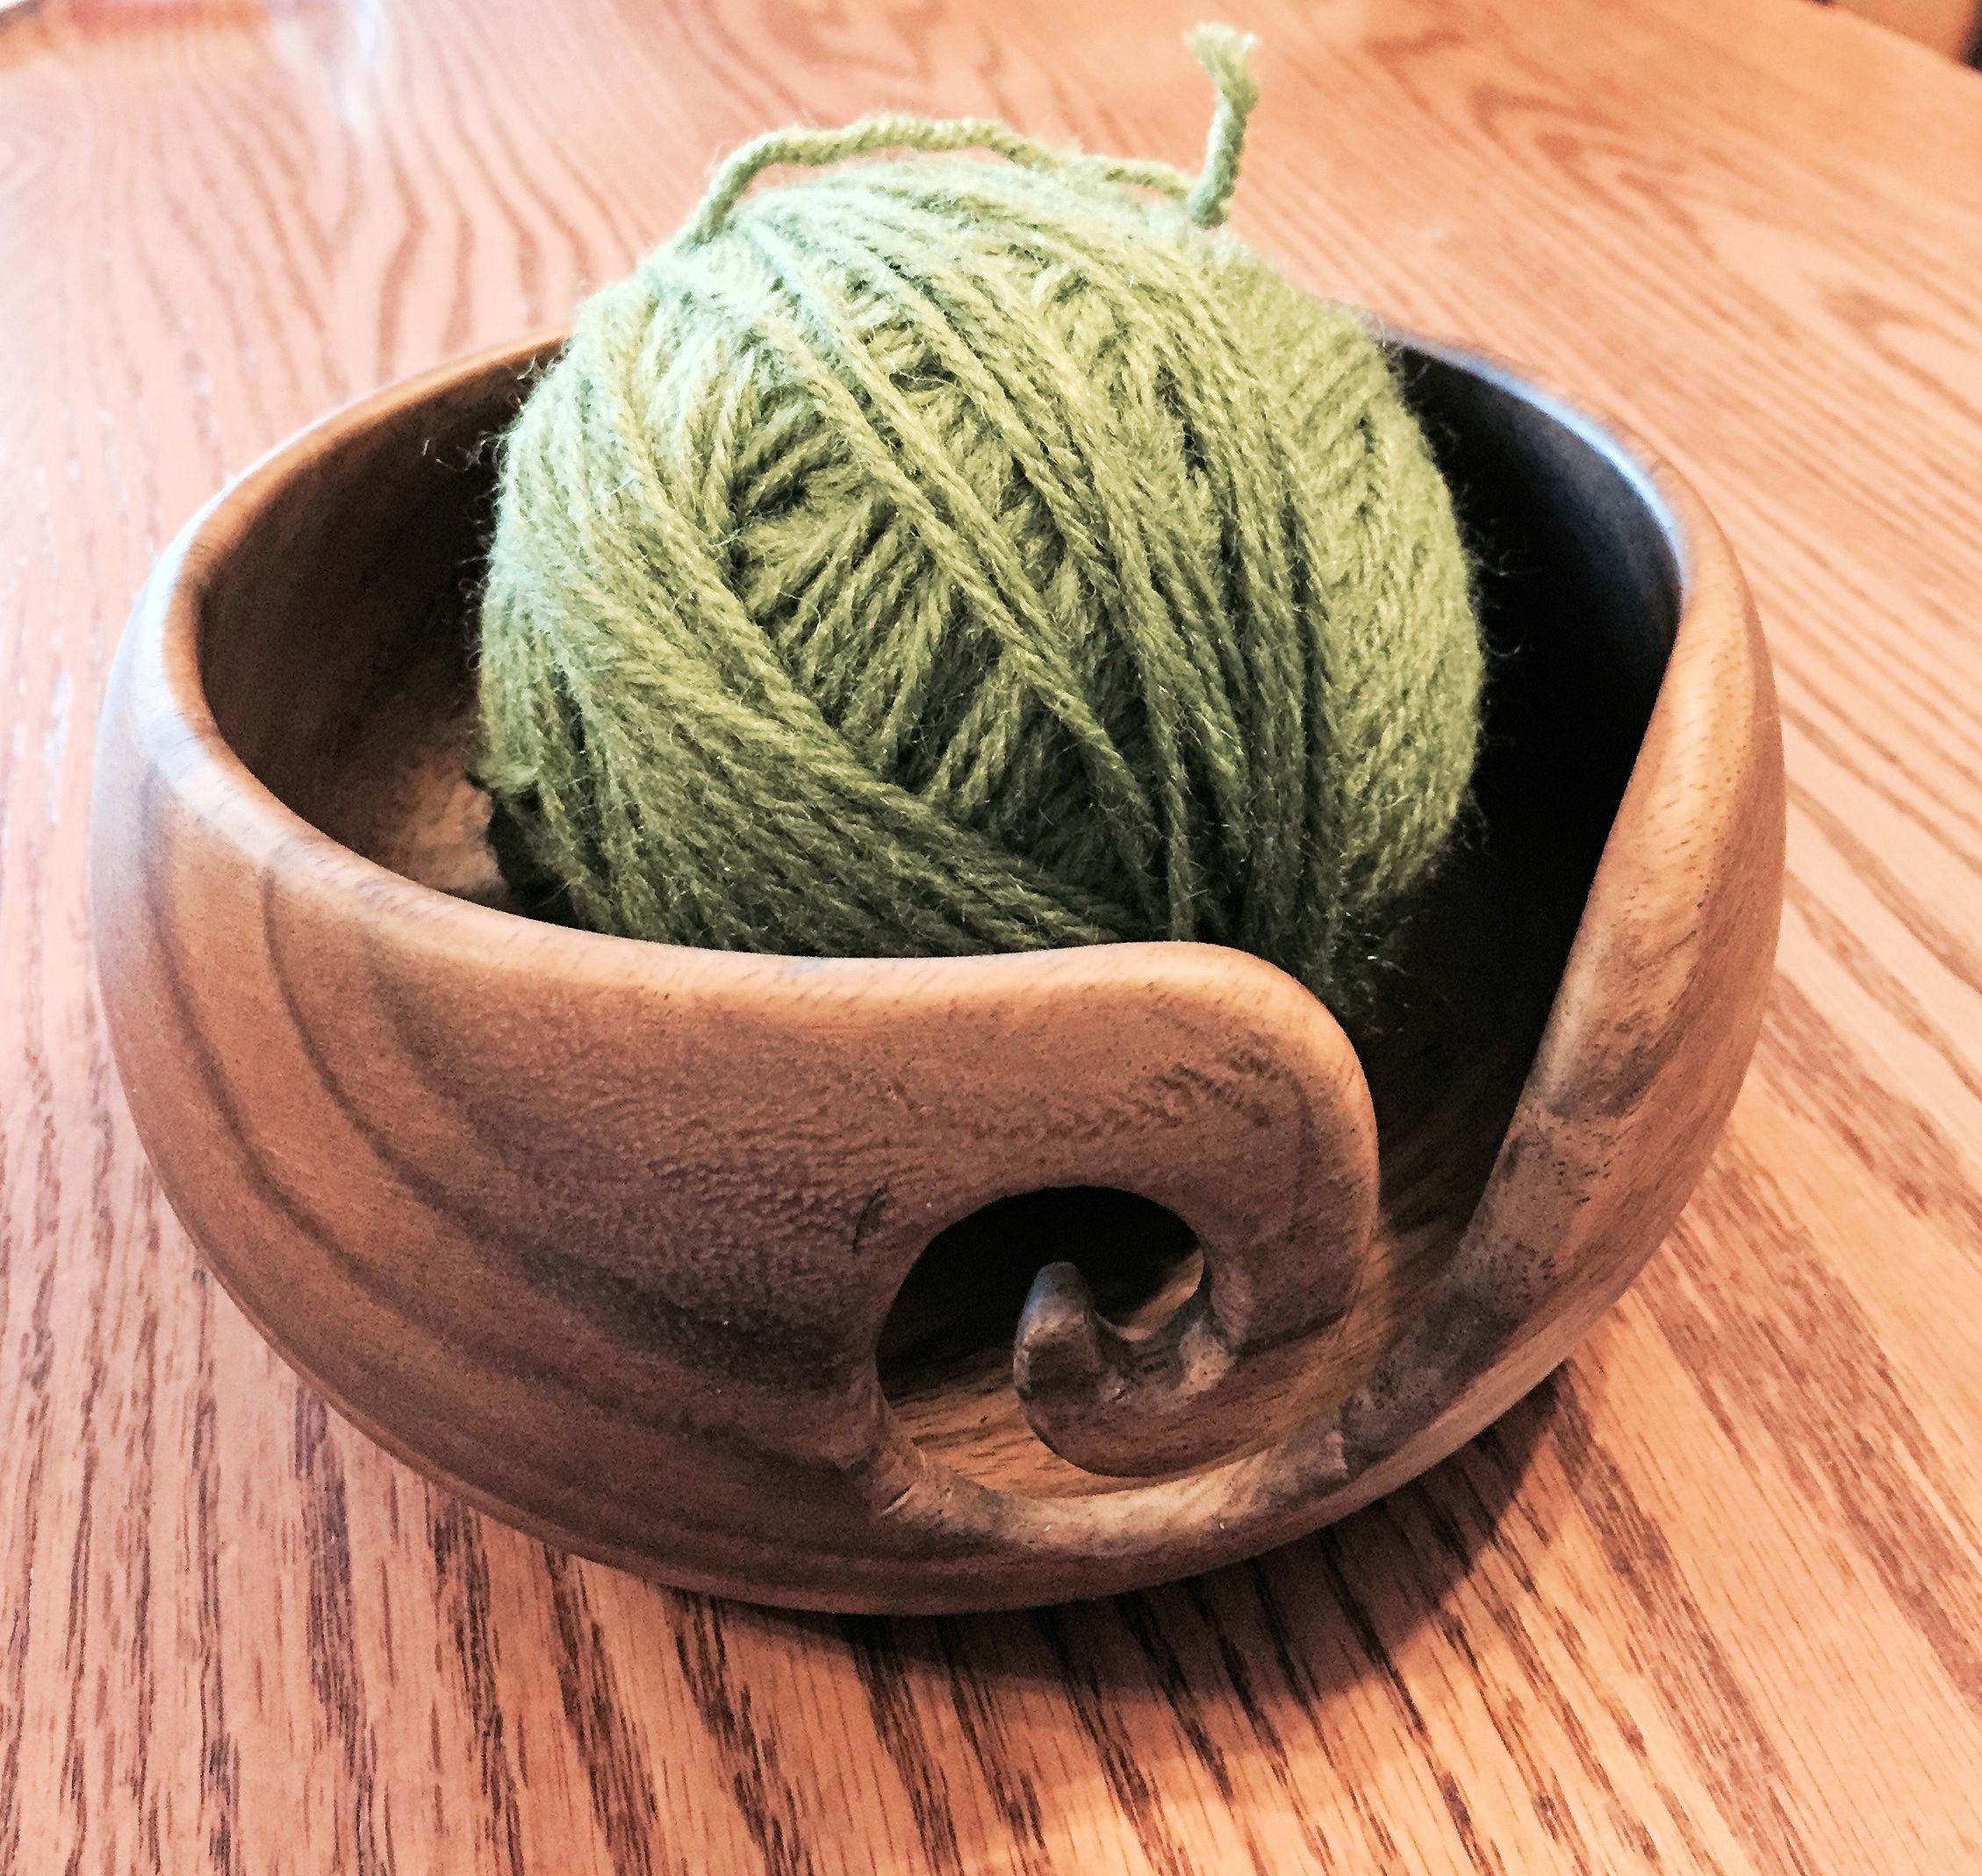 Unraveling the Secrets of the Pull Skein –